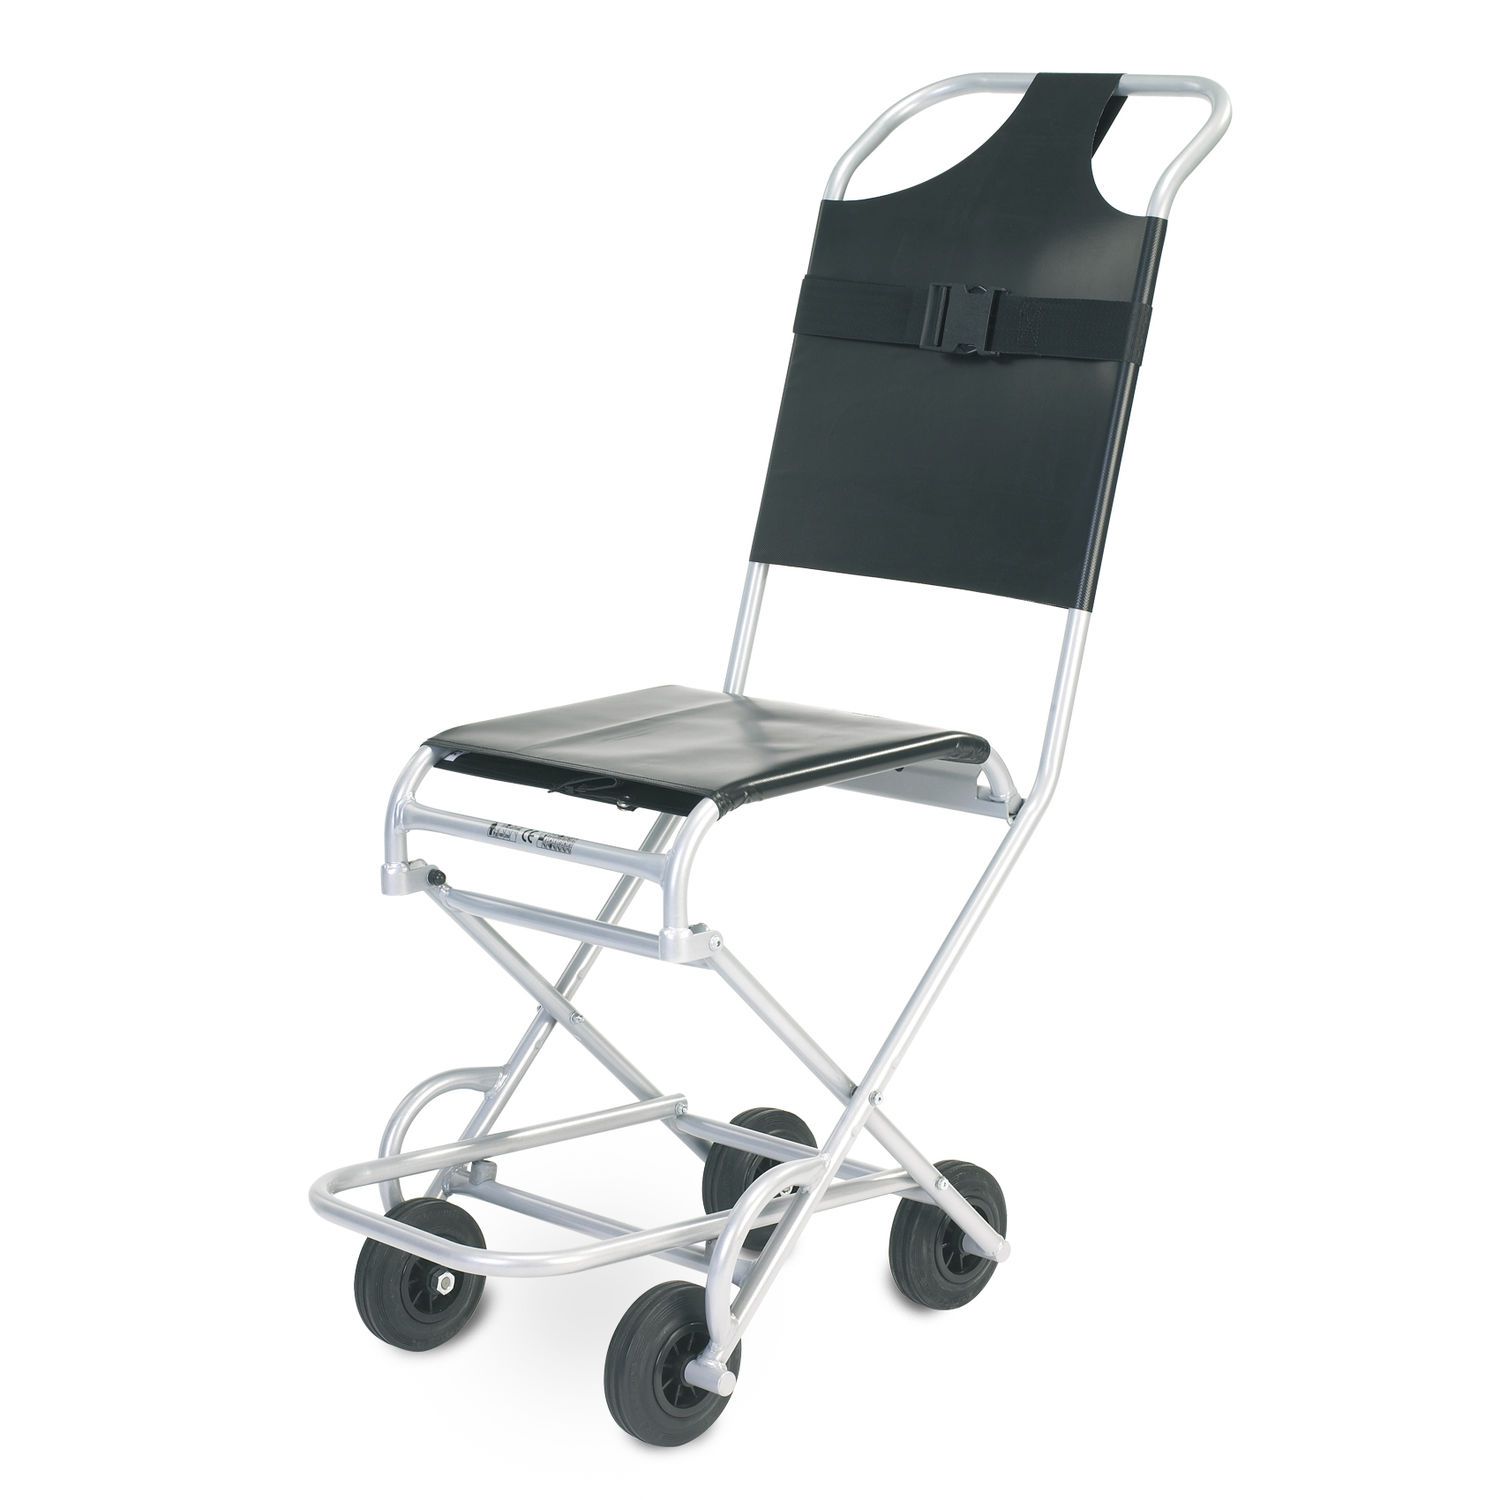 Folding patient transfer chair 114 kg | MK4 Mobyle Ferno (UK) Limited